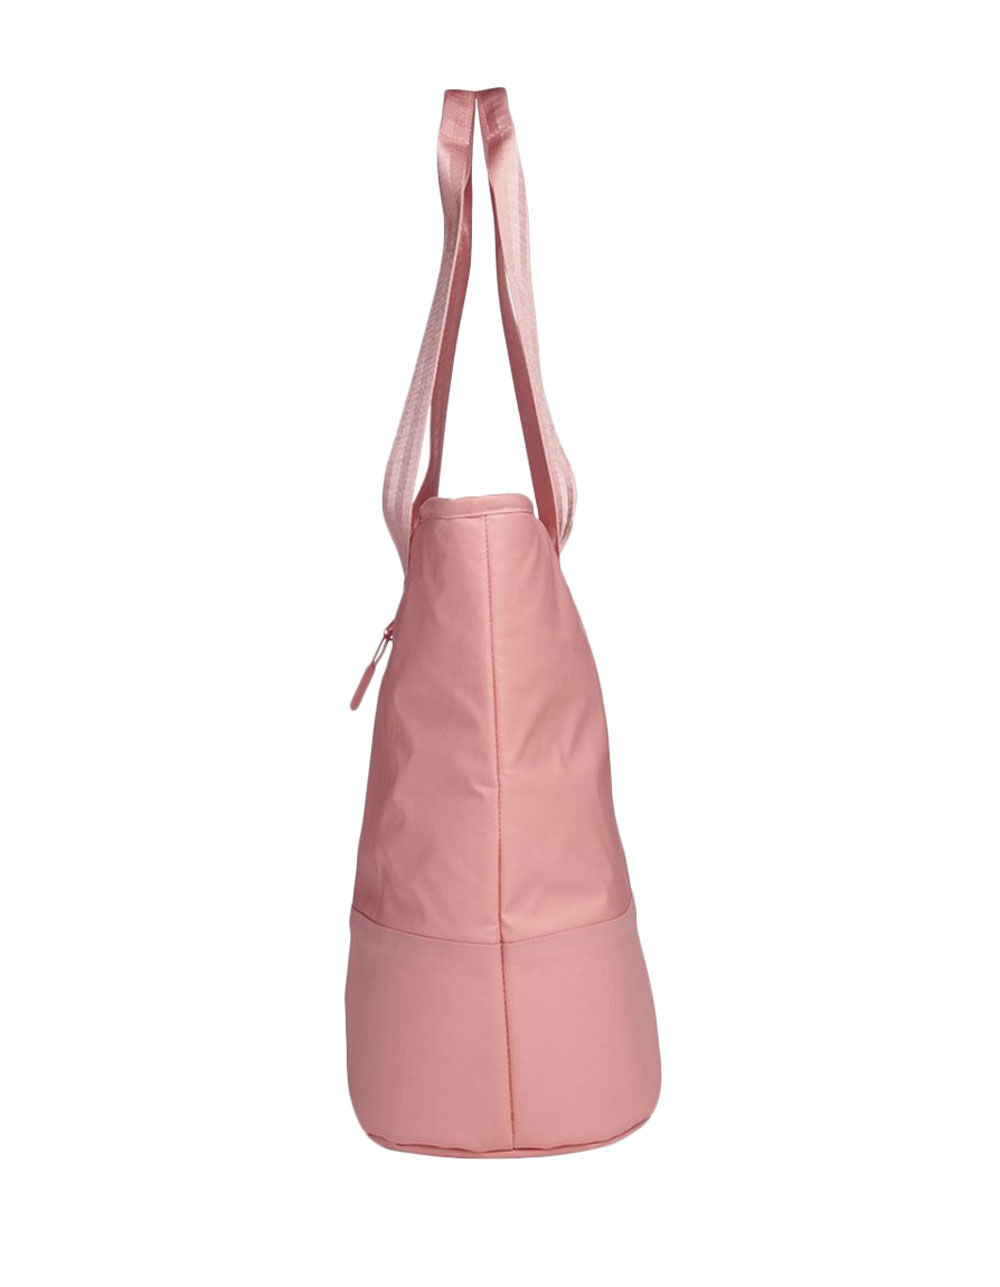 Color comparison of the 8L lunch tote in grapefruit and 12oz in hibiscus -  $28 for both on Sierra! : r/Hydroflask